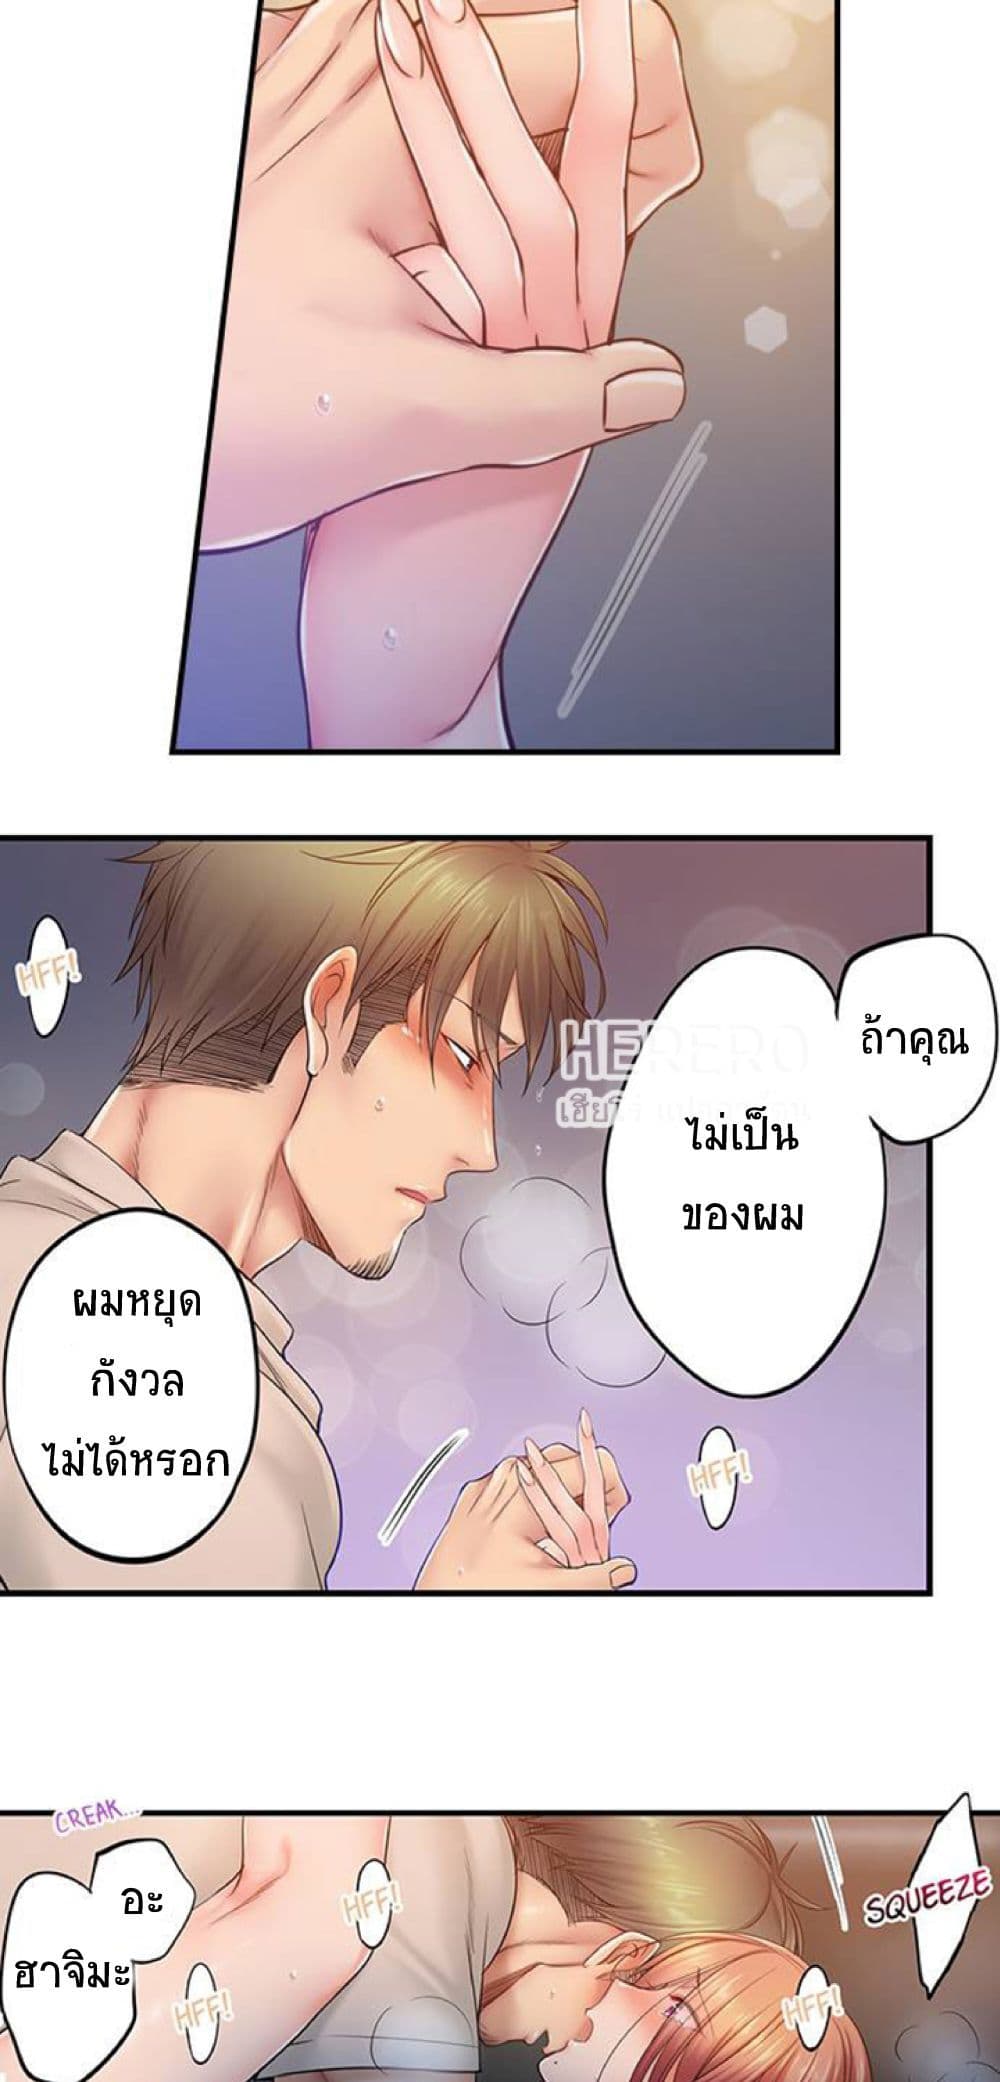 I Can't Resist His Massage! Cheating in Front ร ยธโ€ขร ยธยญร ยธโขร ยธโ€”ร ยธยตร ยนห93 (17)